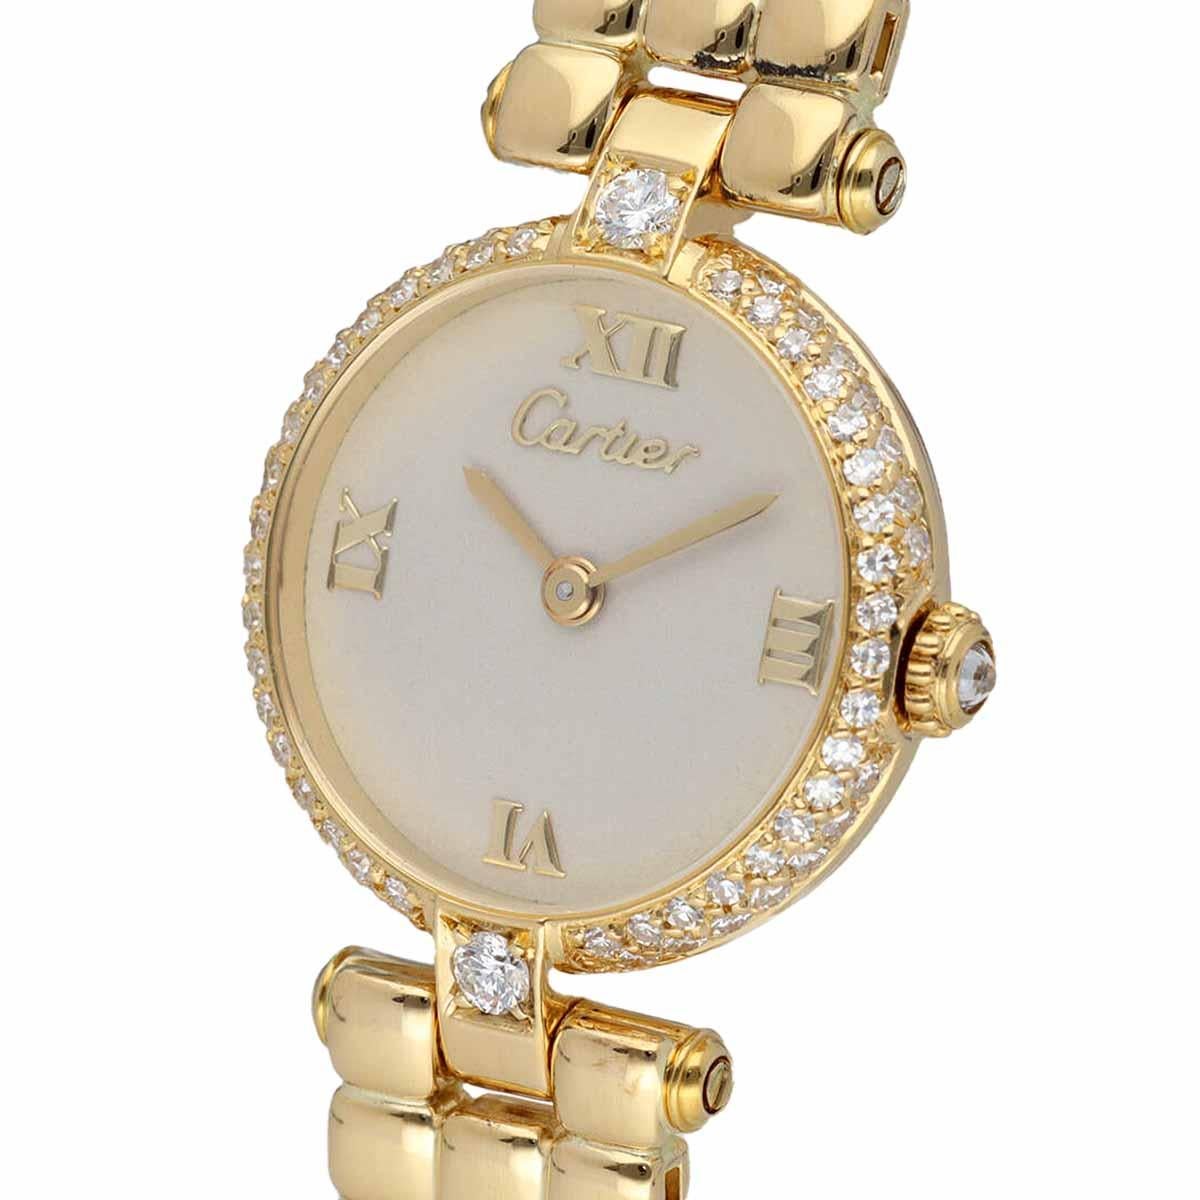 Brand:Cartier
Name:VLC (Vendome) bezel diamond watch SM
Material:Diamonds, 750K18 YG yellow gold
Band length(inch):16cm / 6.29in（Approx)
Band width(inch):9.73mm / 0.38in（Approx)
Case size(inch):19.14mm /